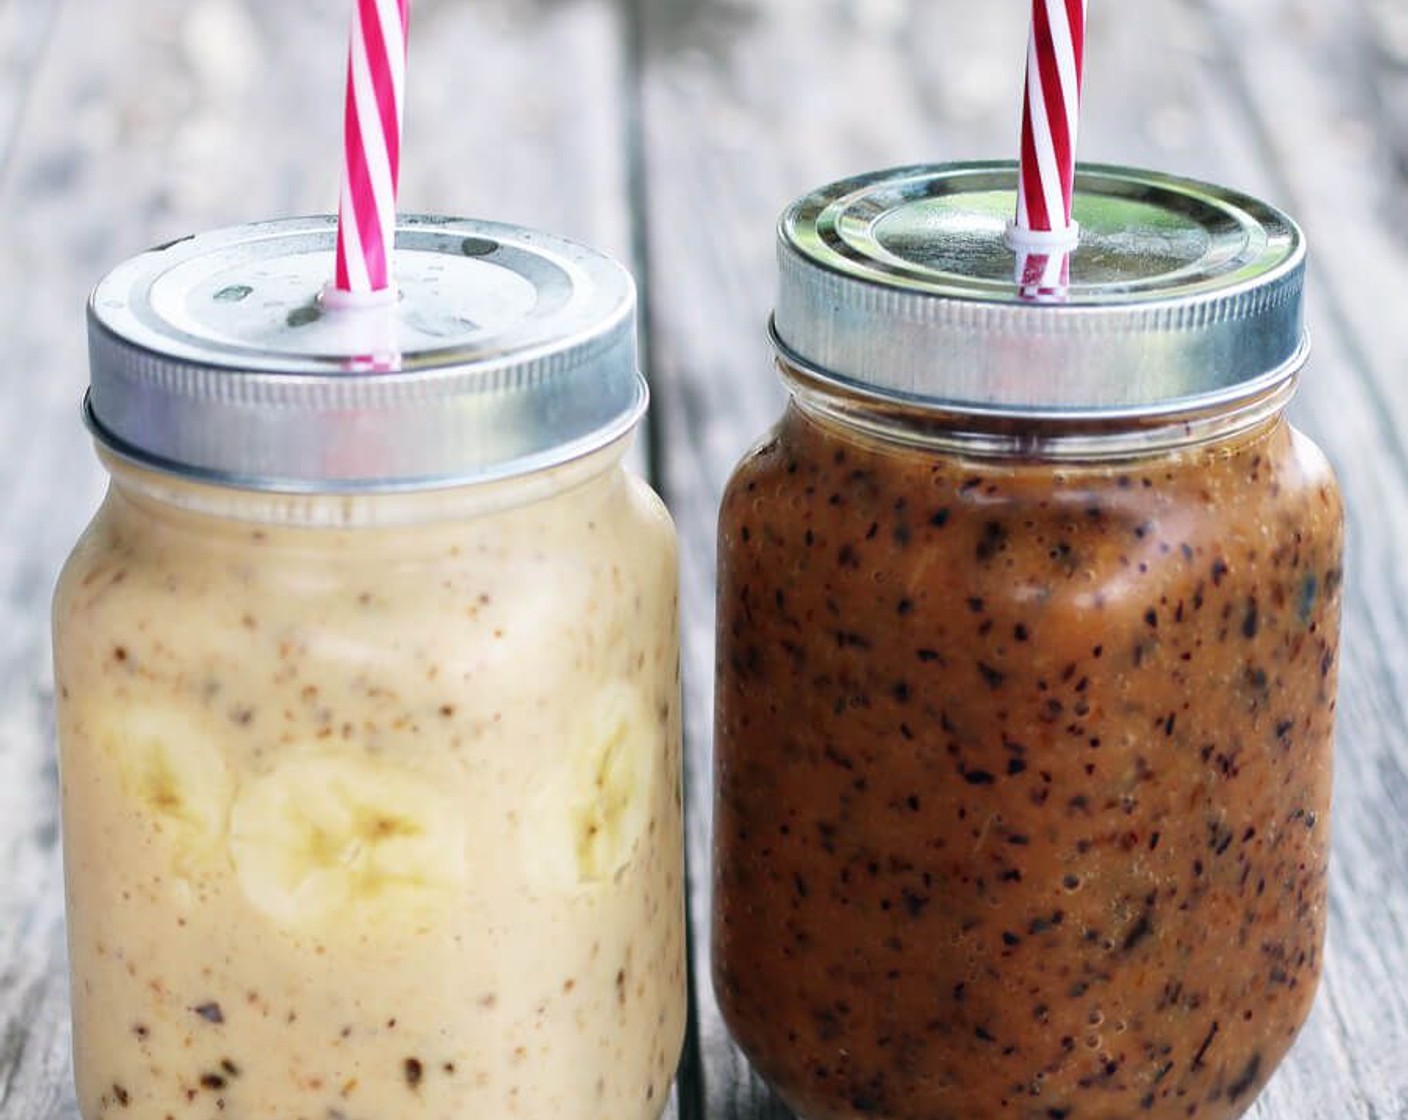 step 2 For the Banana Pineapple Smoothie add Banana (1/2), Pineapple (1/2 cup), Probiotic Pitted Prunes (5), no prep], Greek Yogurt (1/4 cup), Pineapple Juice (1/2 cup) and Ice (1/2 cup) to a blender or smoothie cup. Blend until smooth. Serve cold.